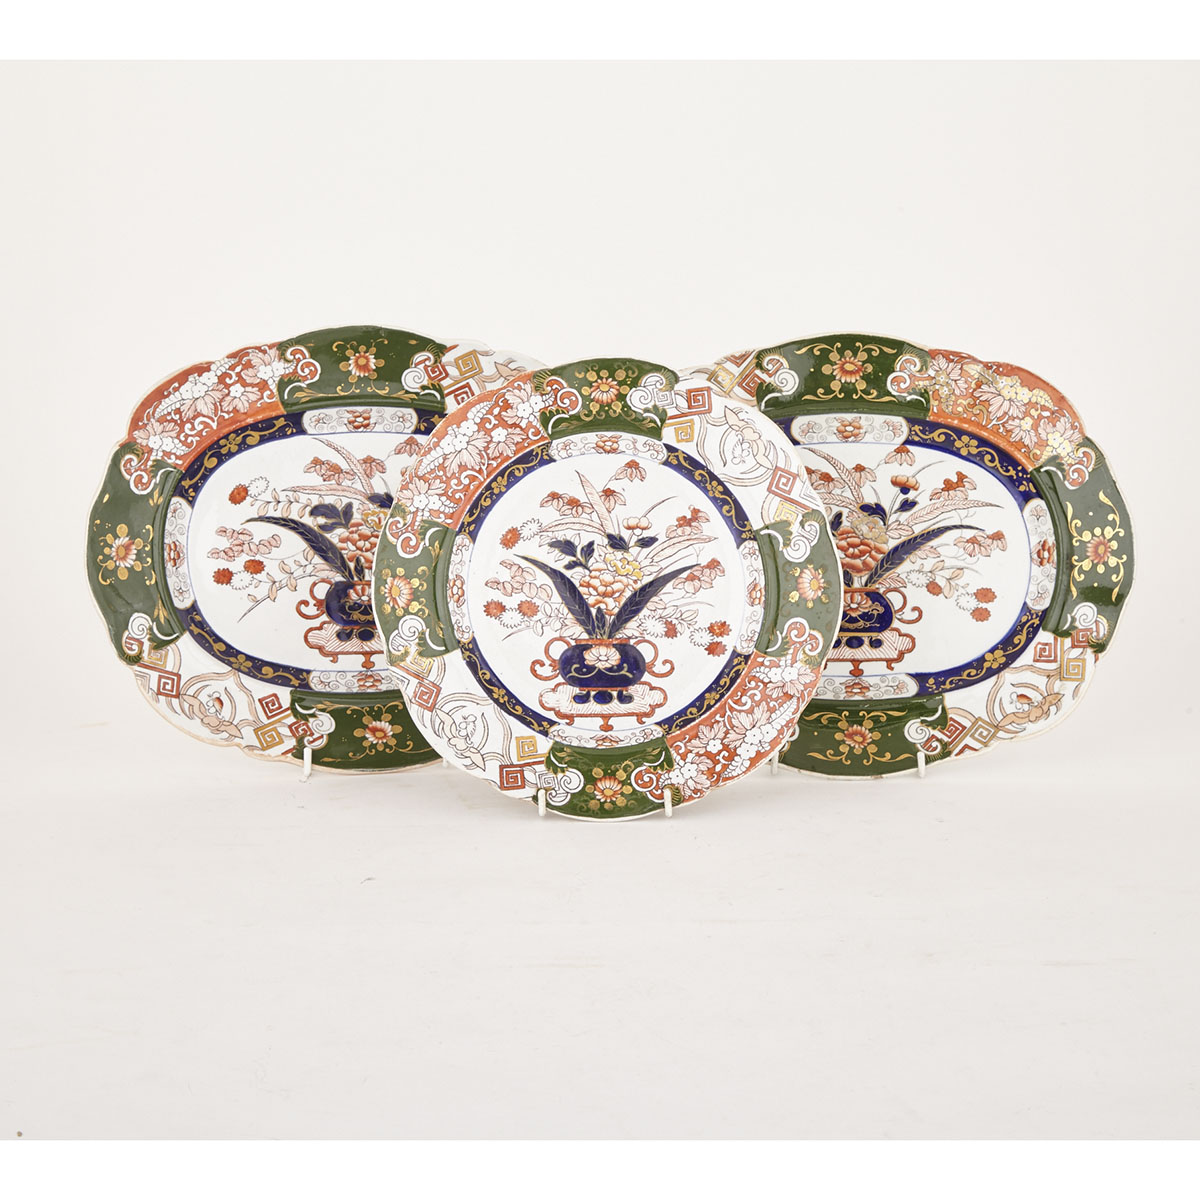 Pair of Mason’s Ironstone Platters and a Plate, c.1840